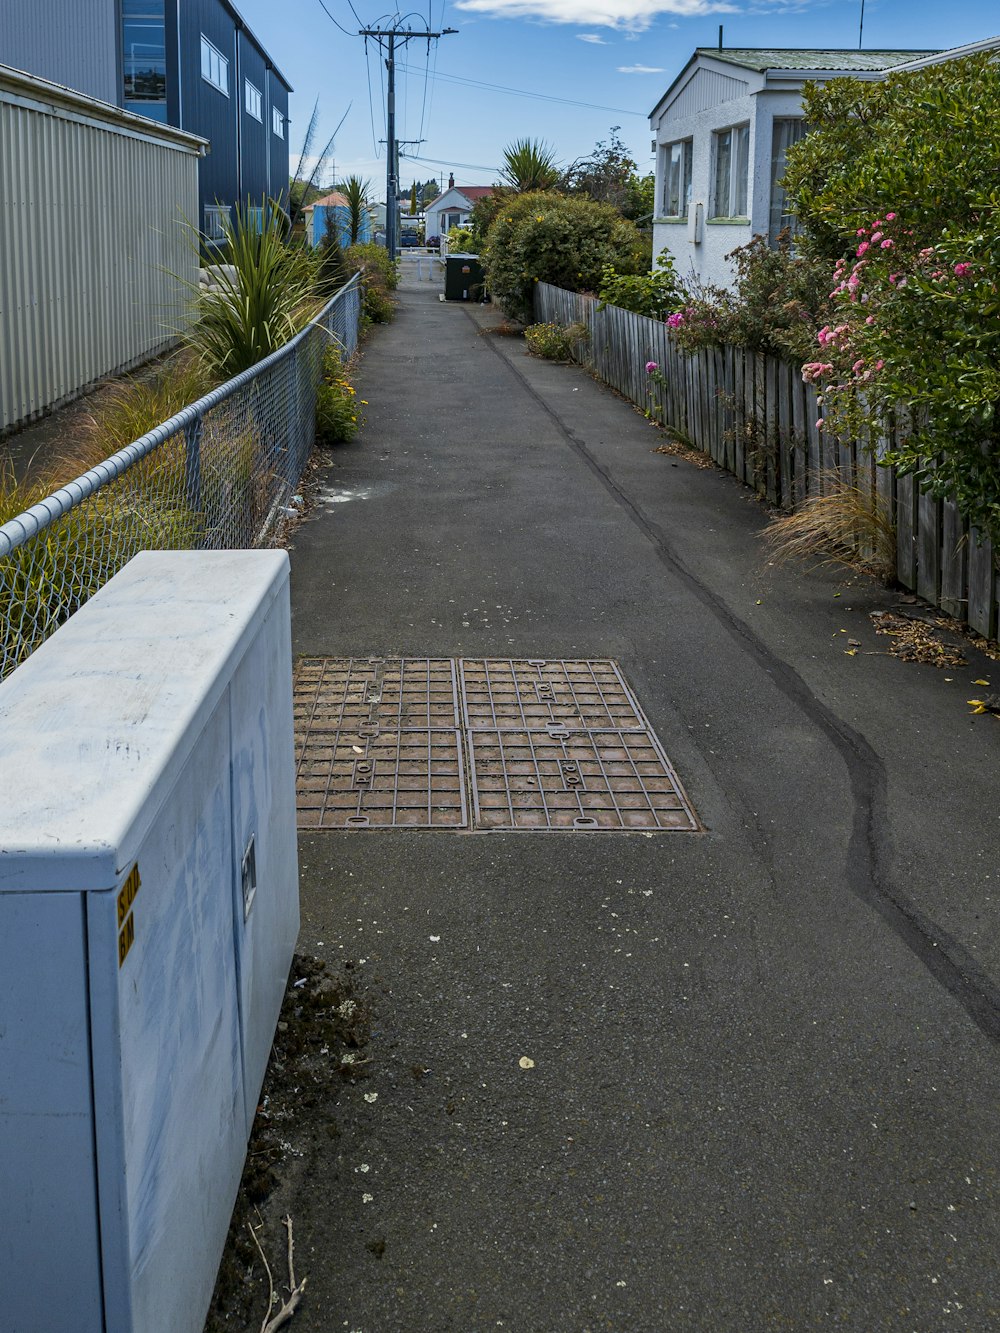 a long narrow road with a metal fence on the side